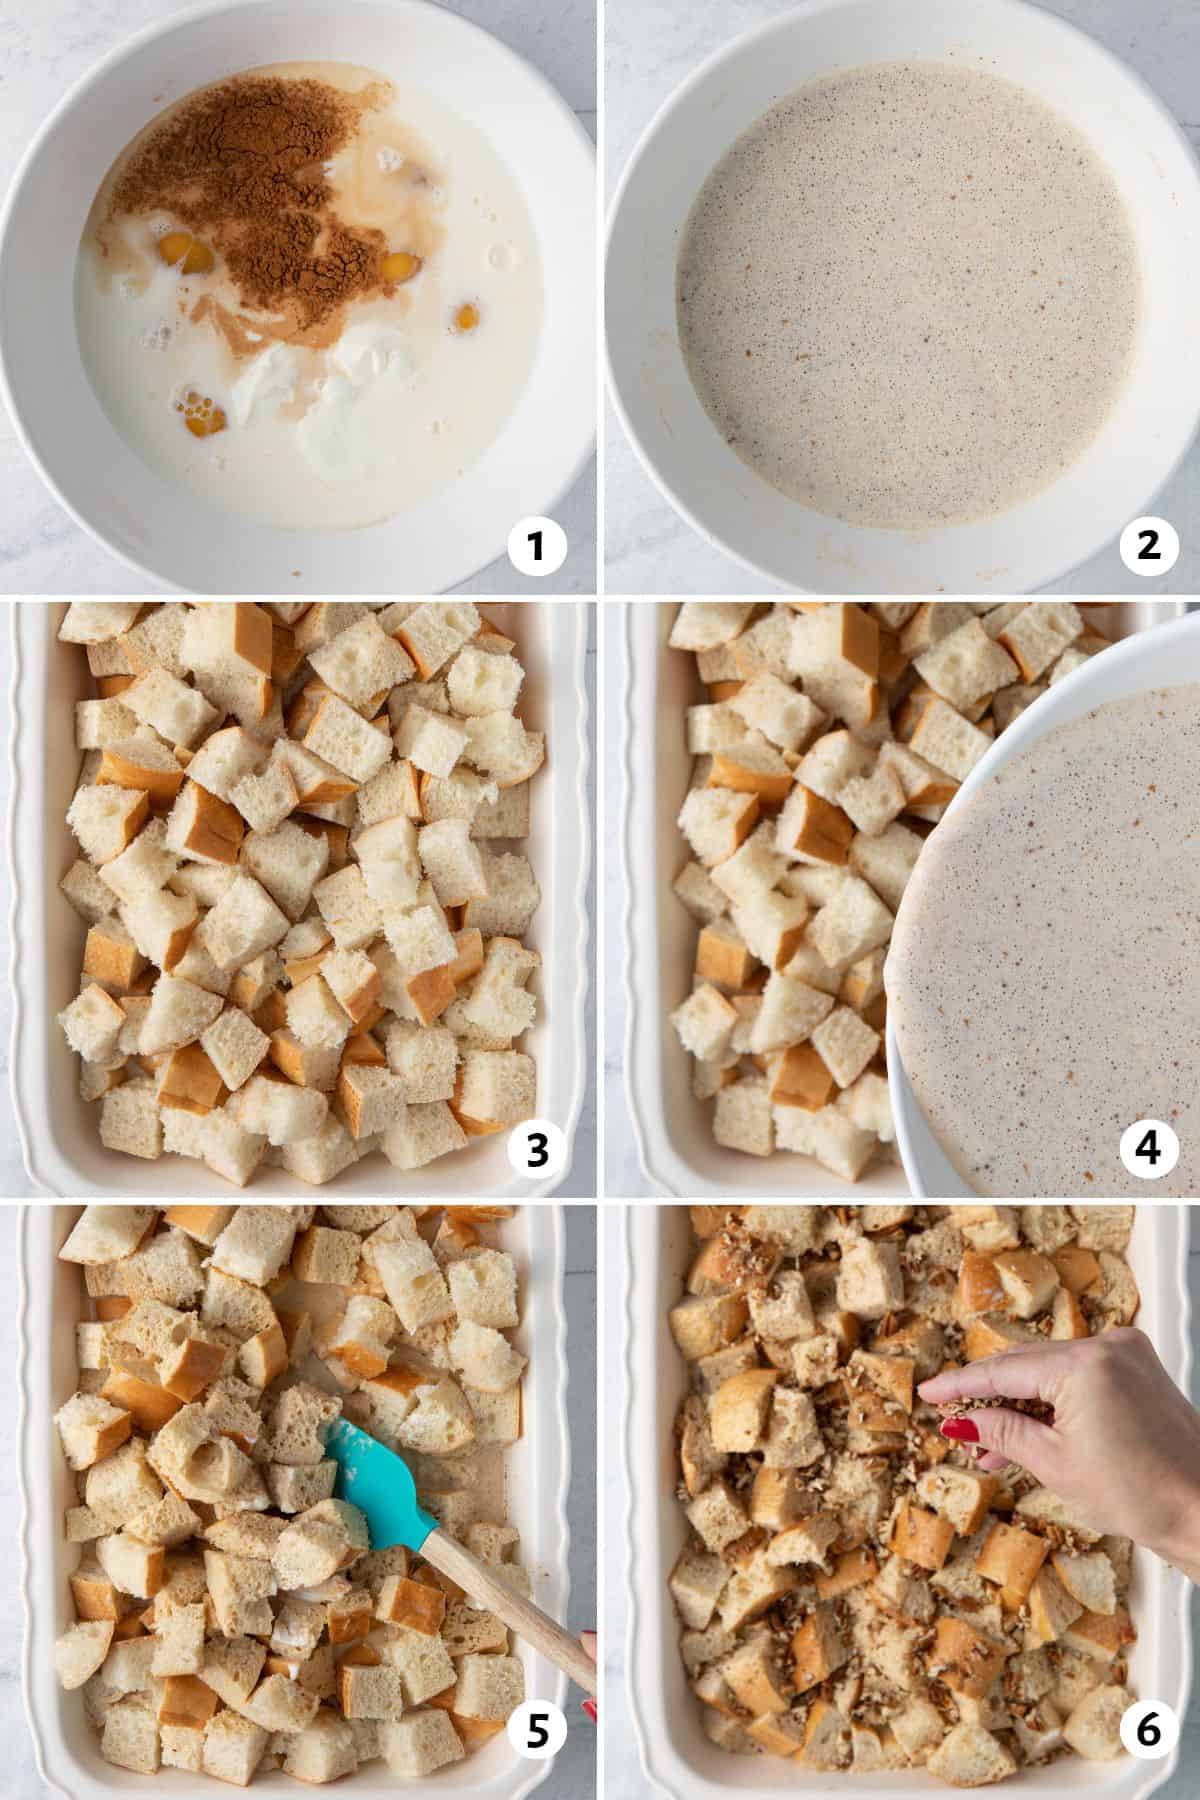 6 image collage preparing recipe for baking: 1- add custard ingredients in bowl, 2- whisk together, 3- add cubed bread to baking dish, 4- pour custard mix over, 5- toss bread and egg mix together, 6- sprinkle with chopped pecans.